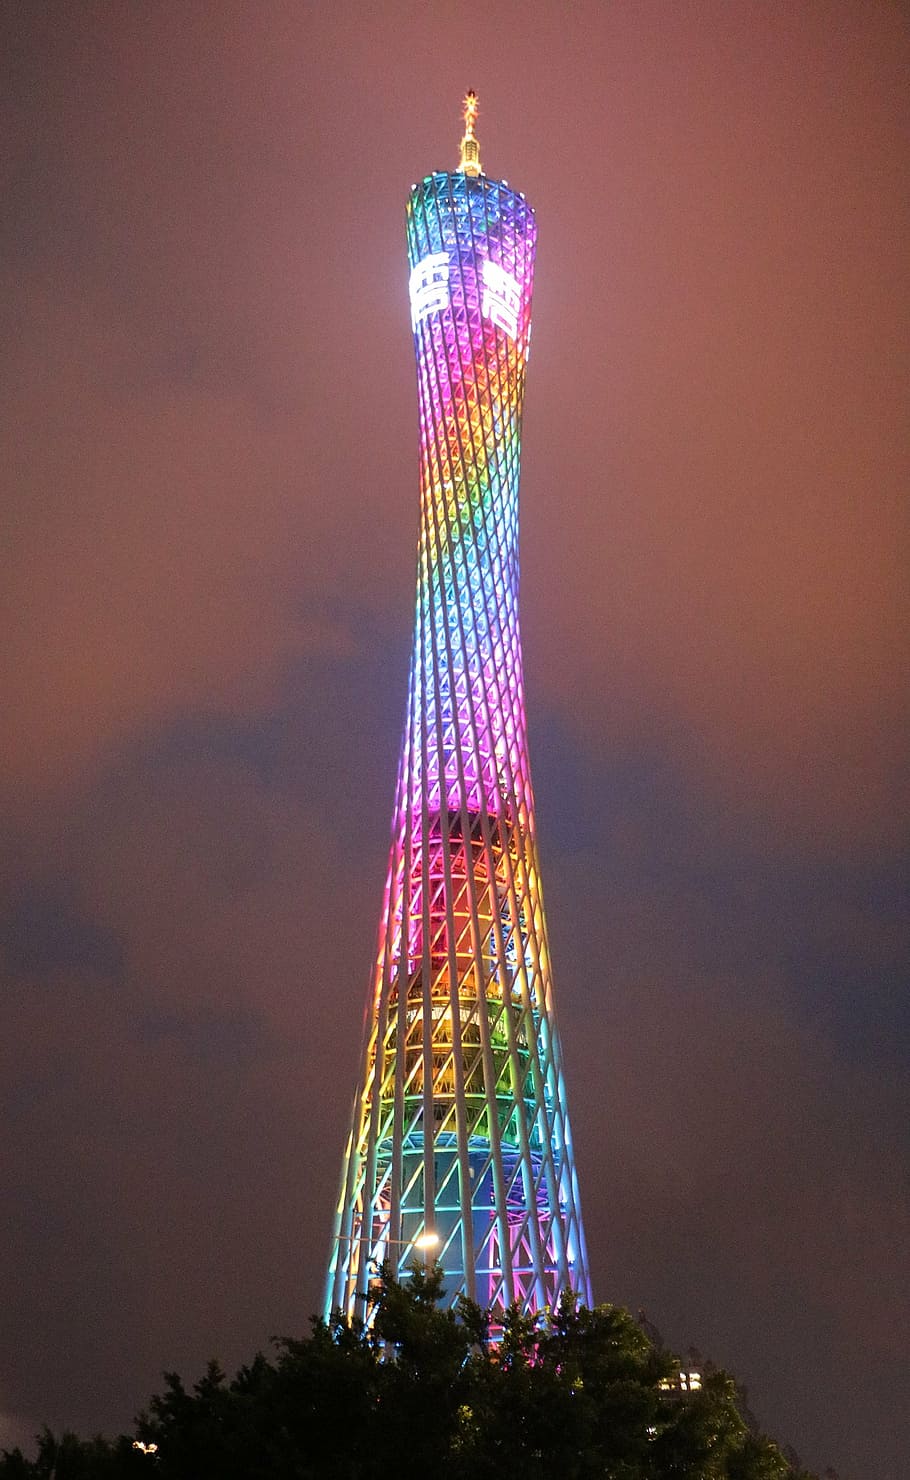 canton tower, waistline, tower telecom, night, tower, famous Place, architecture, cityscape, urban Scene, asia